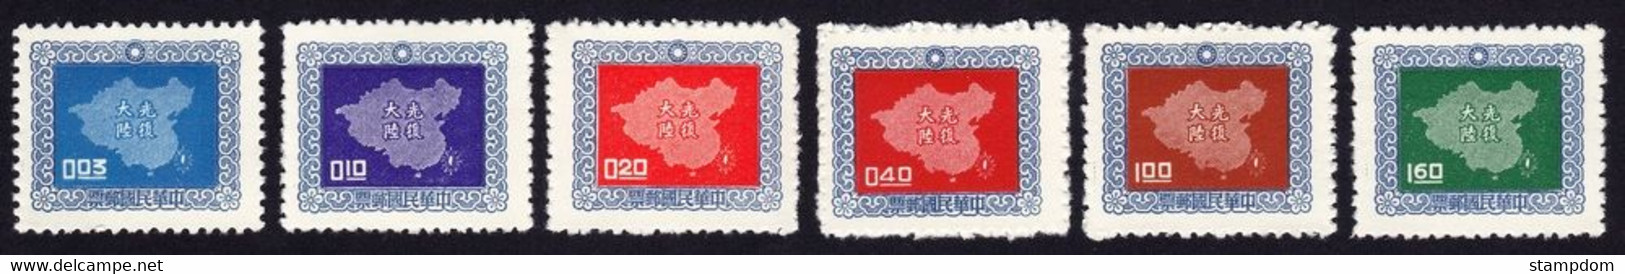 CHINA ROC 1957 Map Of China Sc#1177-1182 MNH @S4643 - Unused Stamps